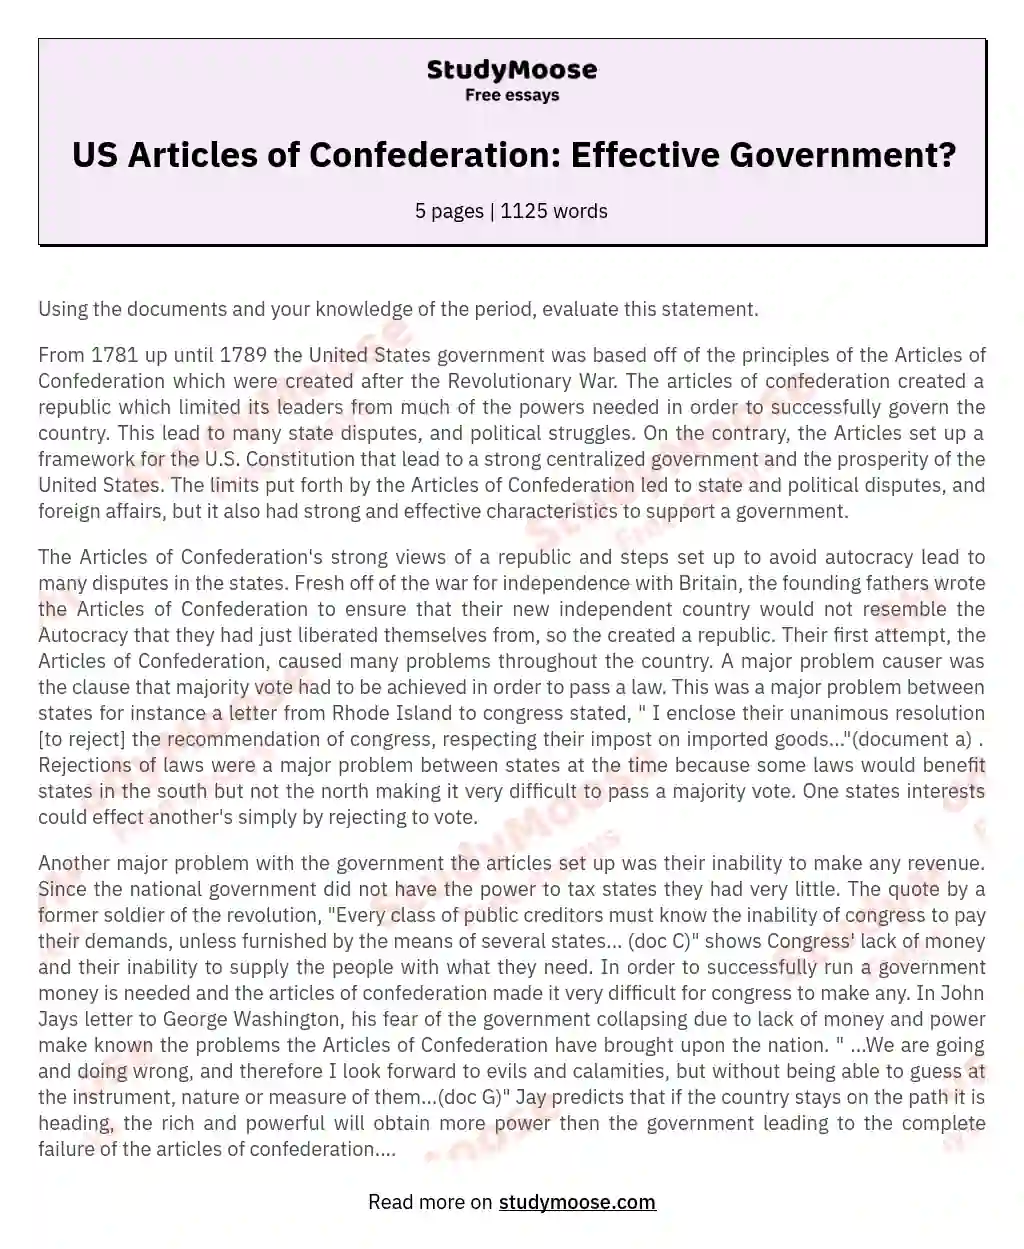 US Articles of Confederation: Effective Government? essay